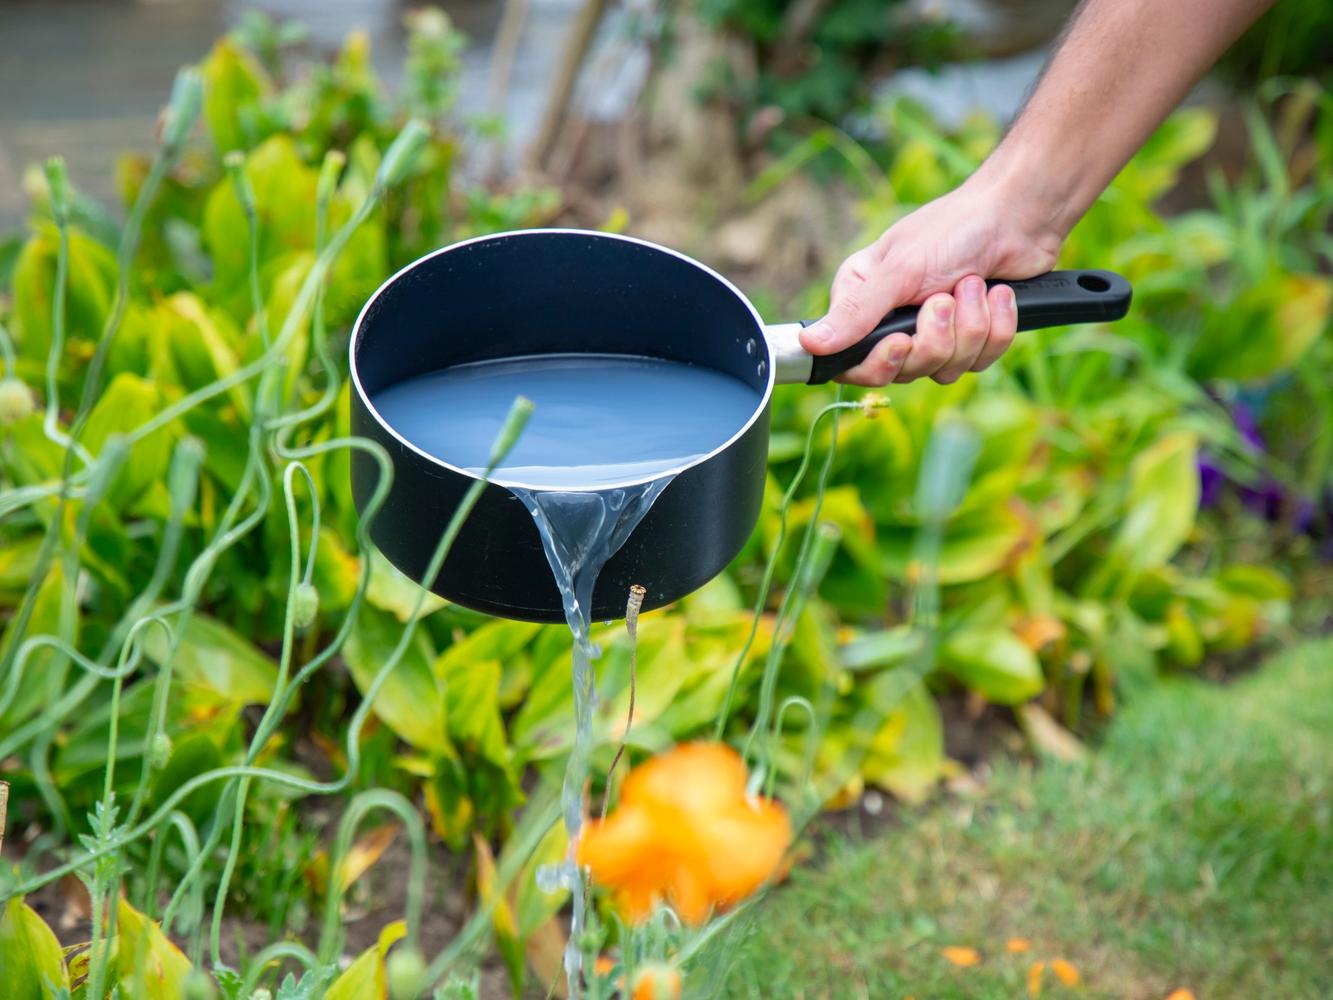 Tipping cooking water from saucepan onto grass